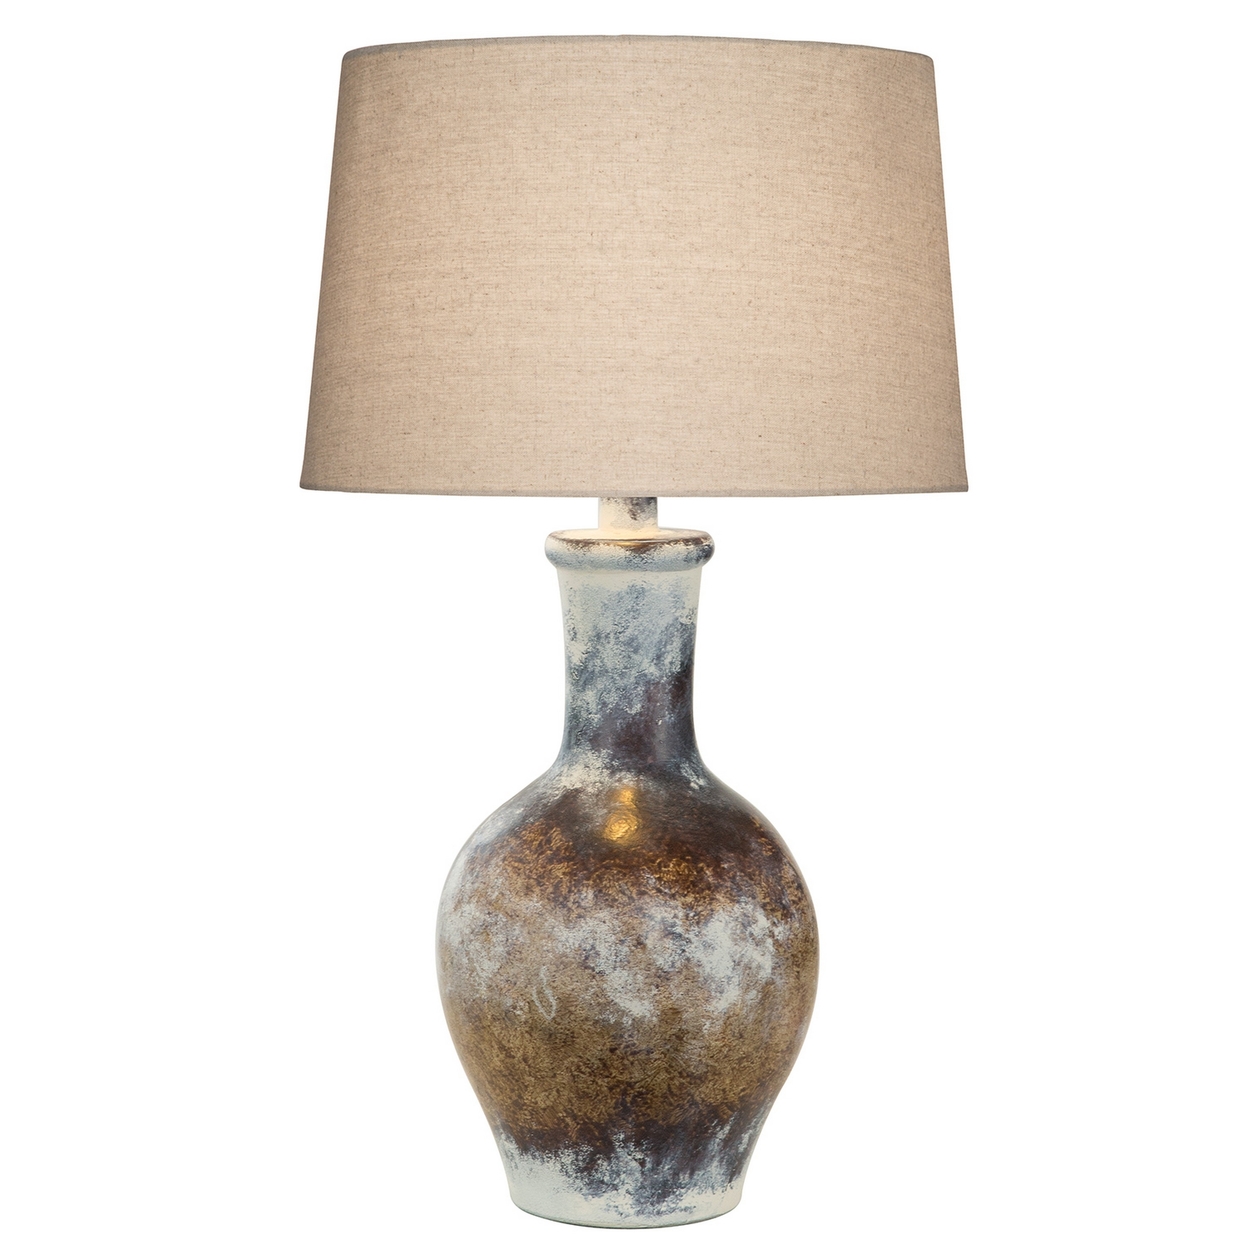 Aine 29 Inch Hydrocal Table Lamp, Drum Shade, Urn Shaped Base, Multicolor- Saltoro Sherpi